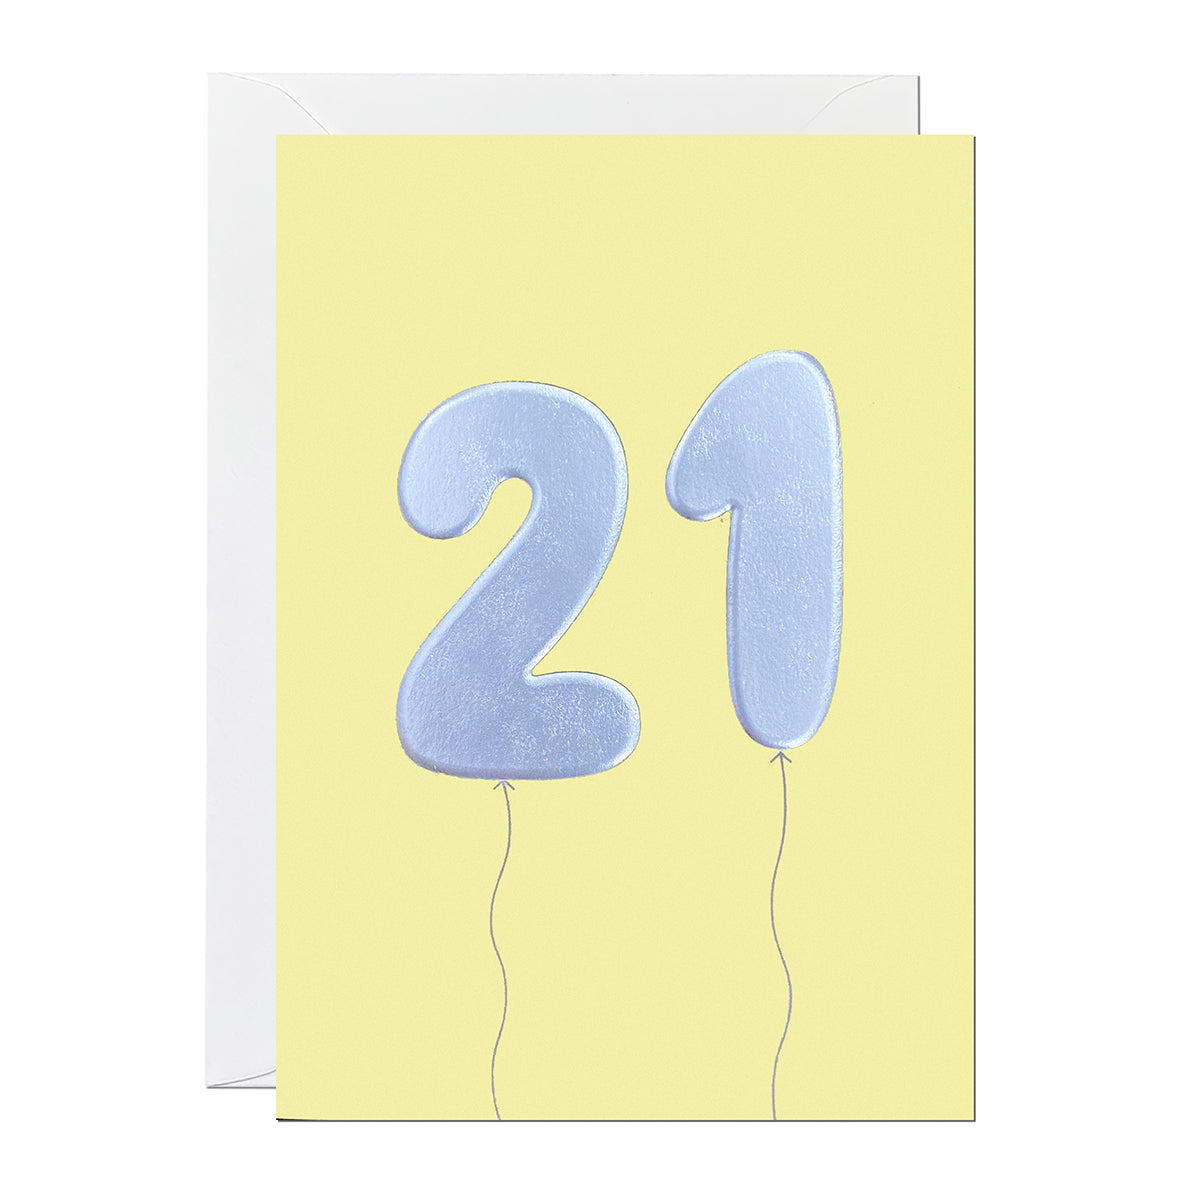 An 21st birthday card featuring big helium balloons printed with an embossed silver foil on a yellow card.